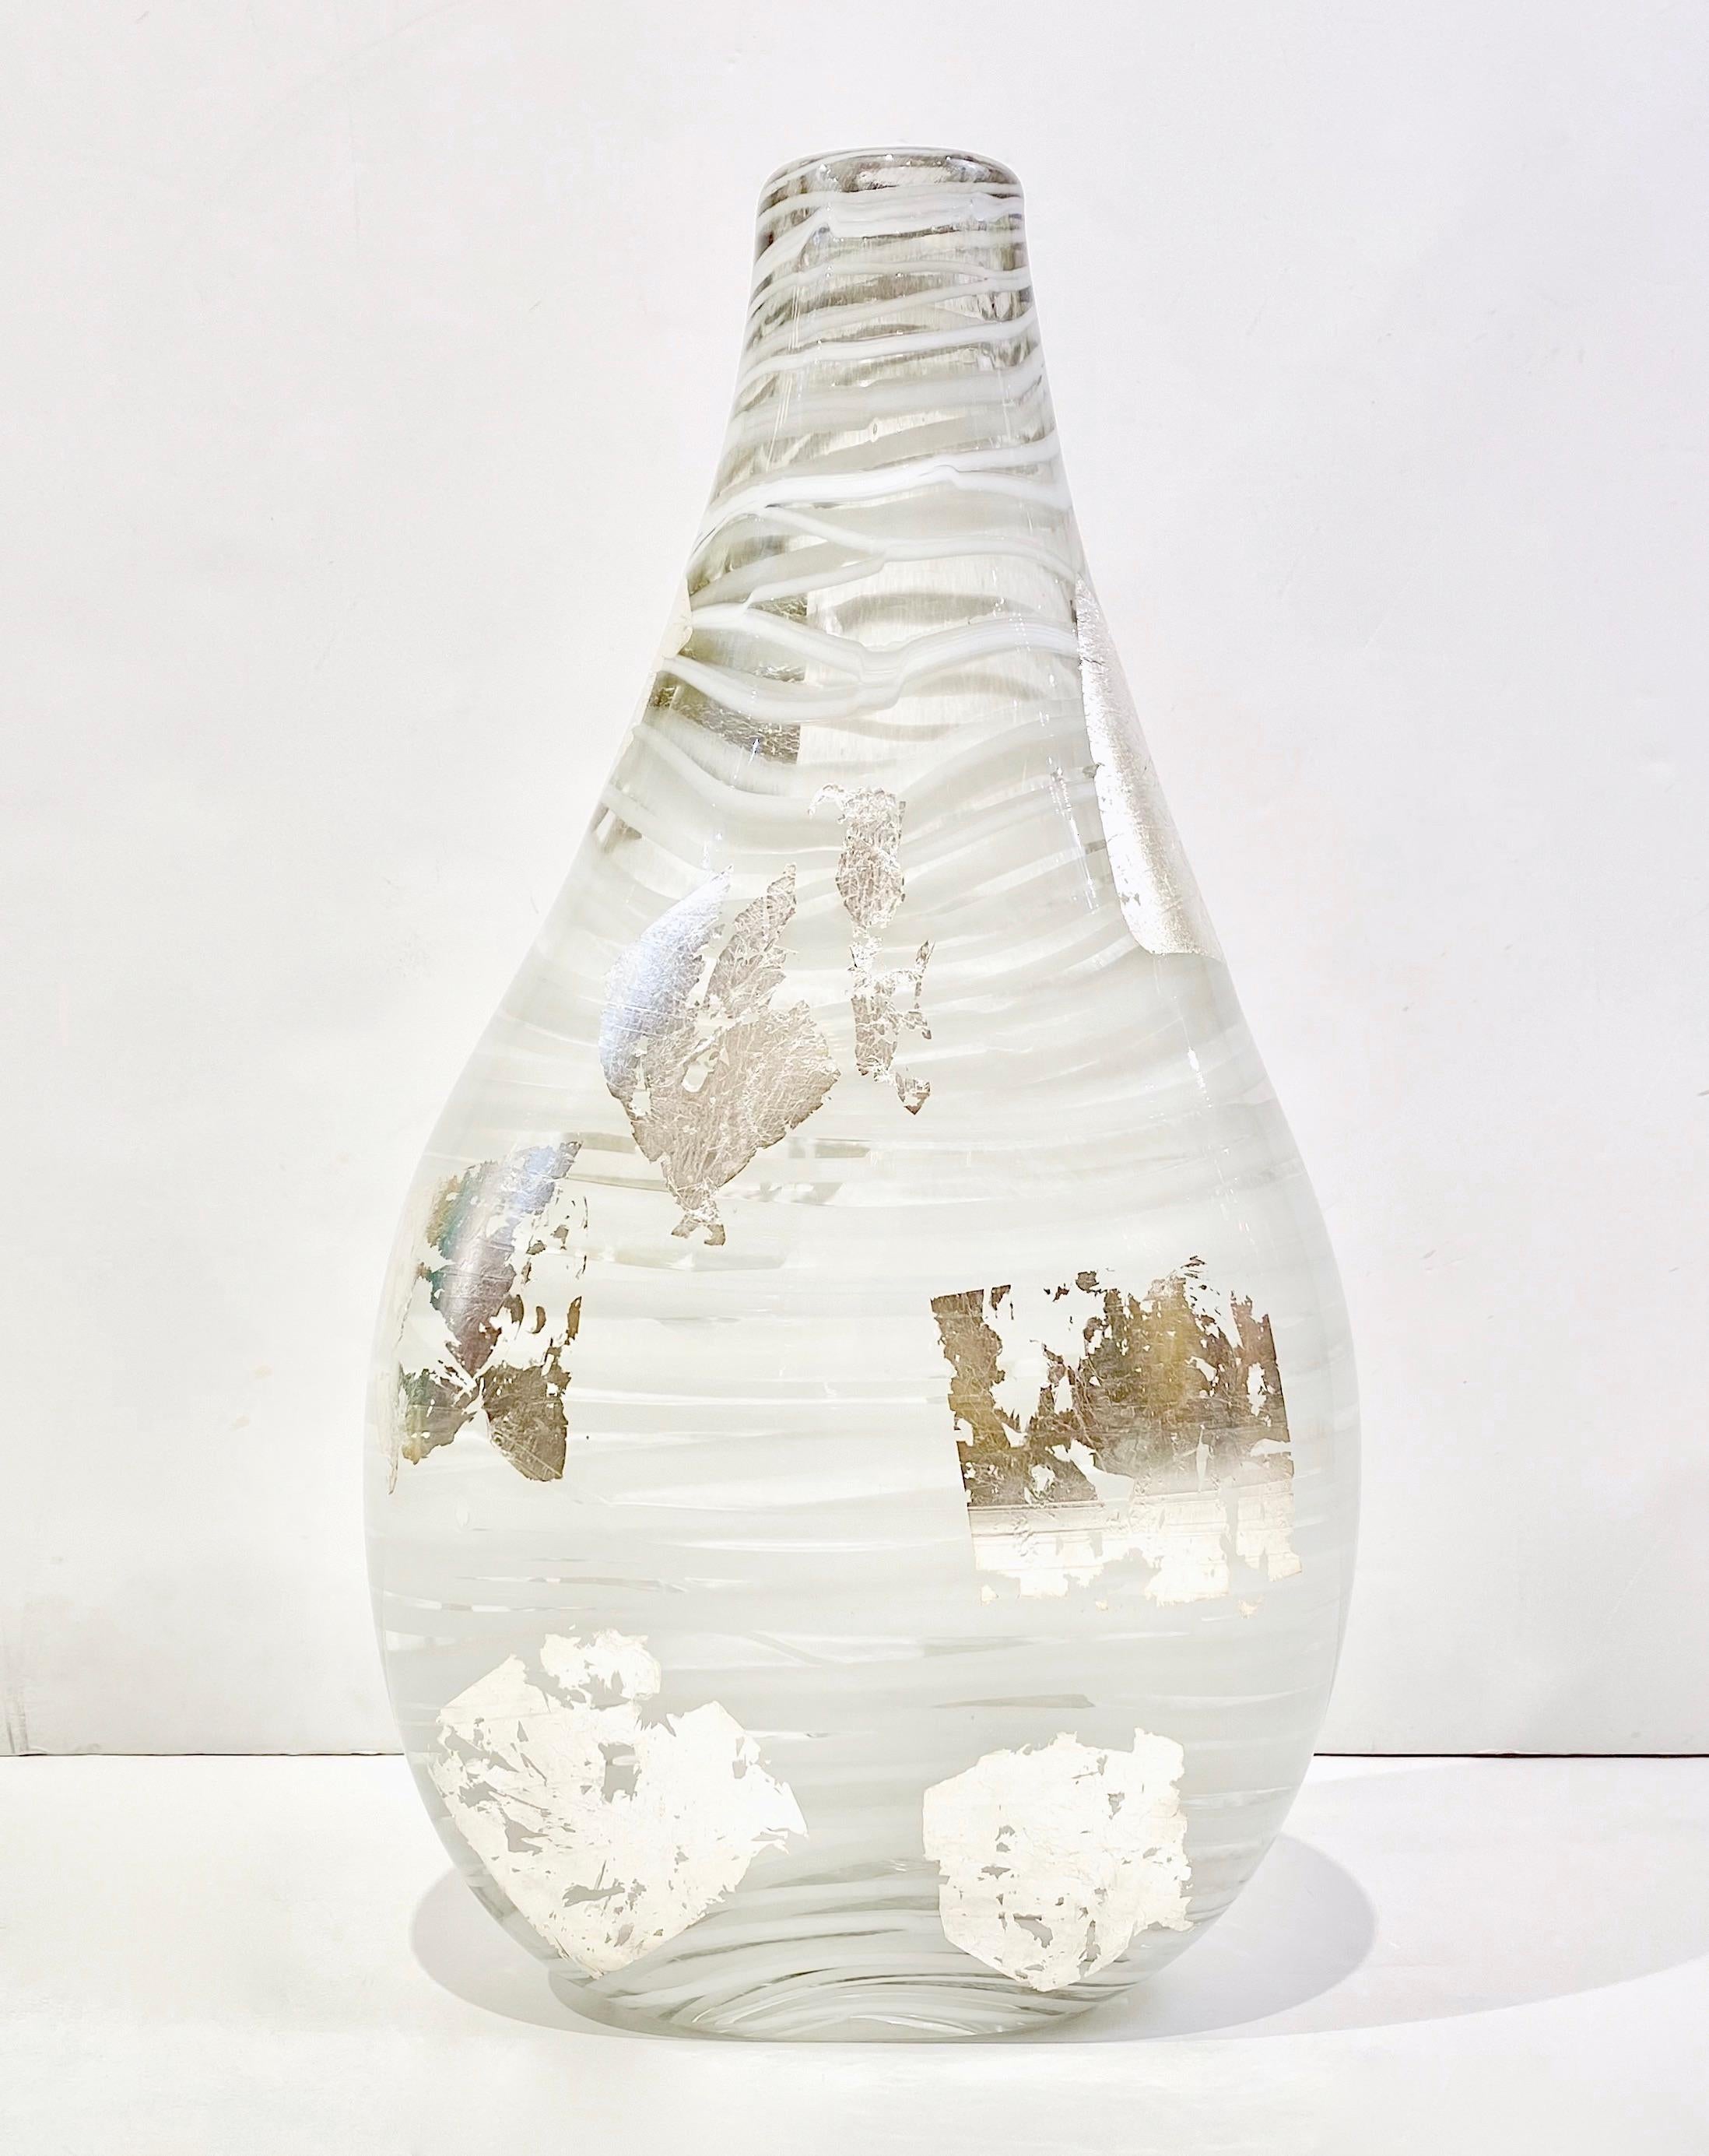 Elegant Minimalist organic creation, crystal clear thick blown Murano glass sculptural flower vase, decorated with white threading Filigrana wrapped around the drop shape, creating a fascinating abstract modern design. The body is made precious by